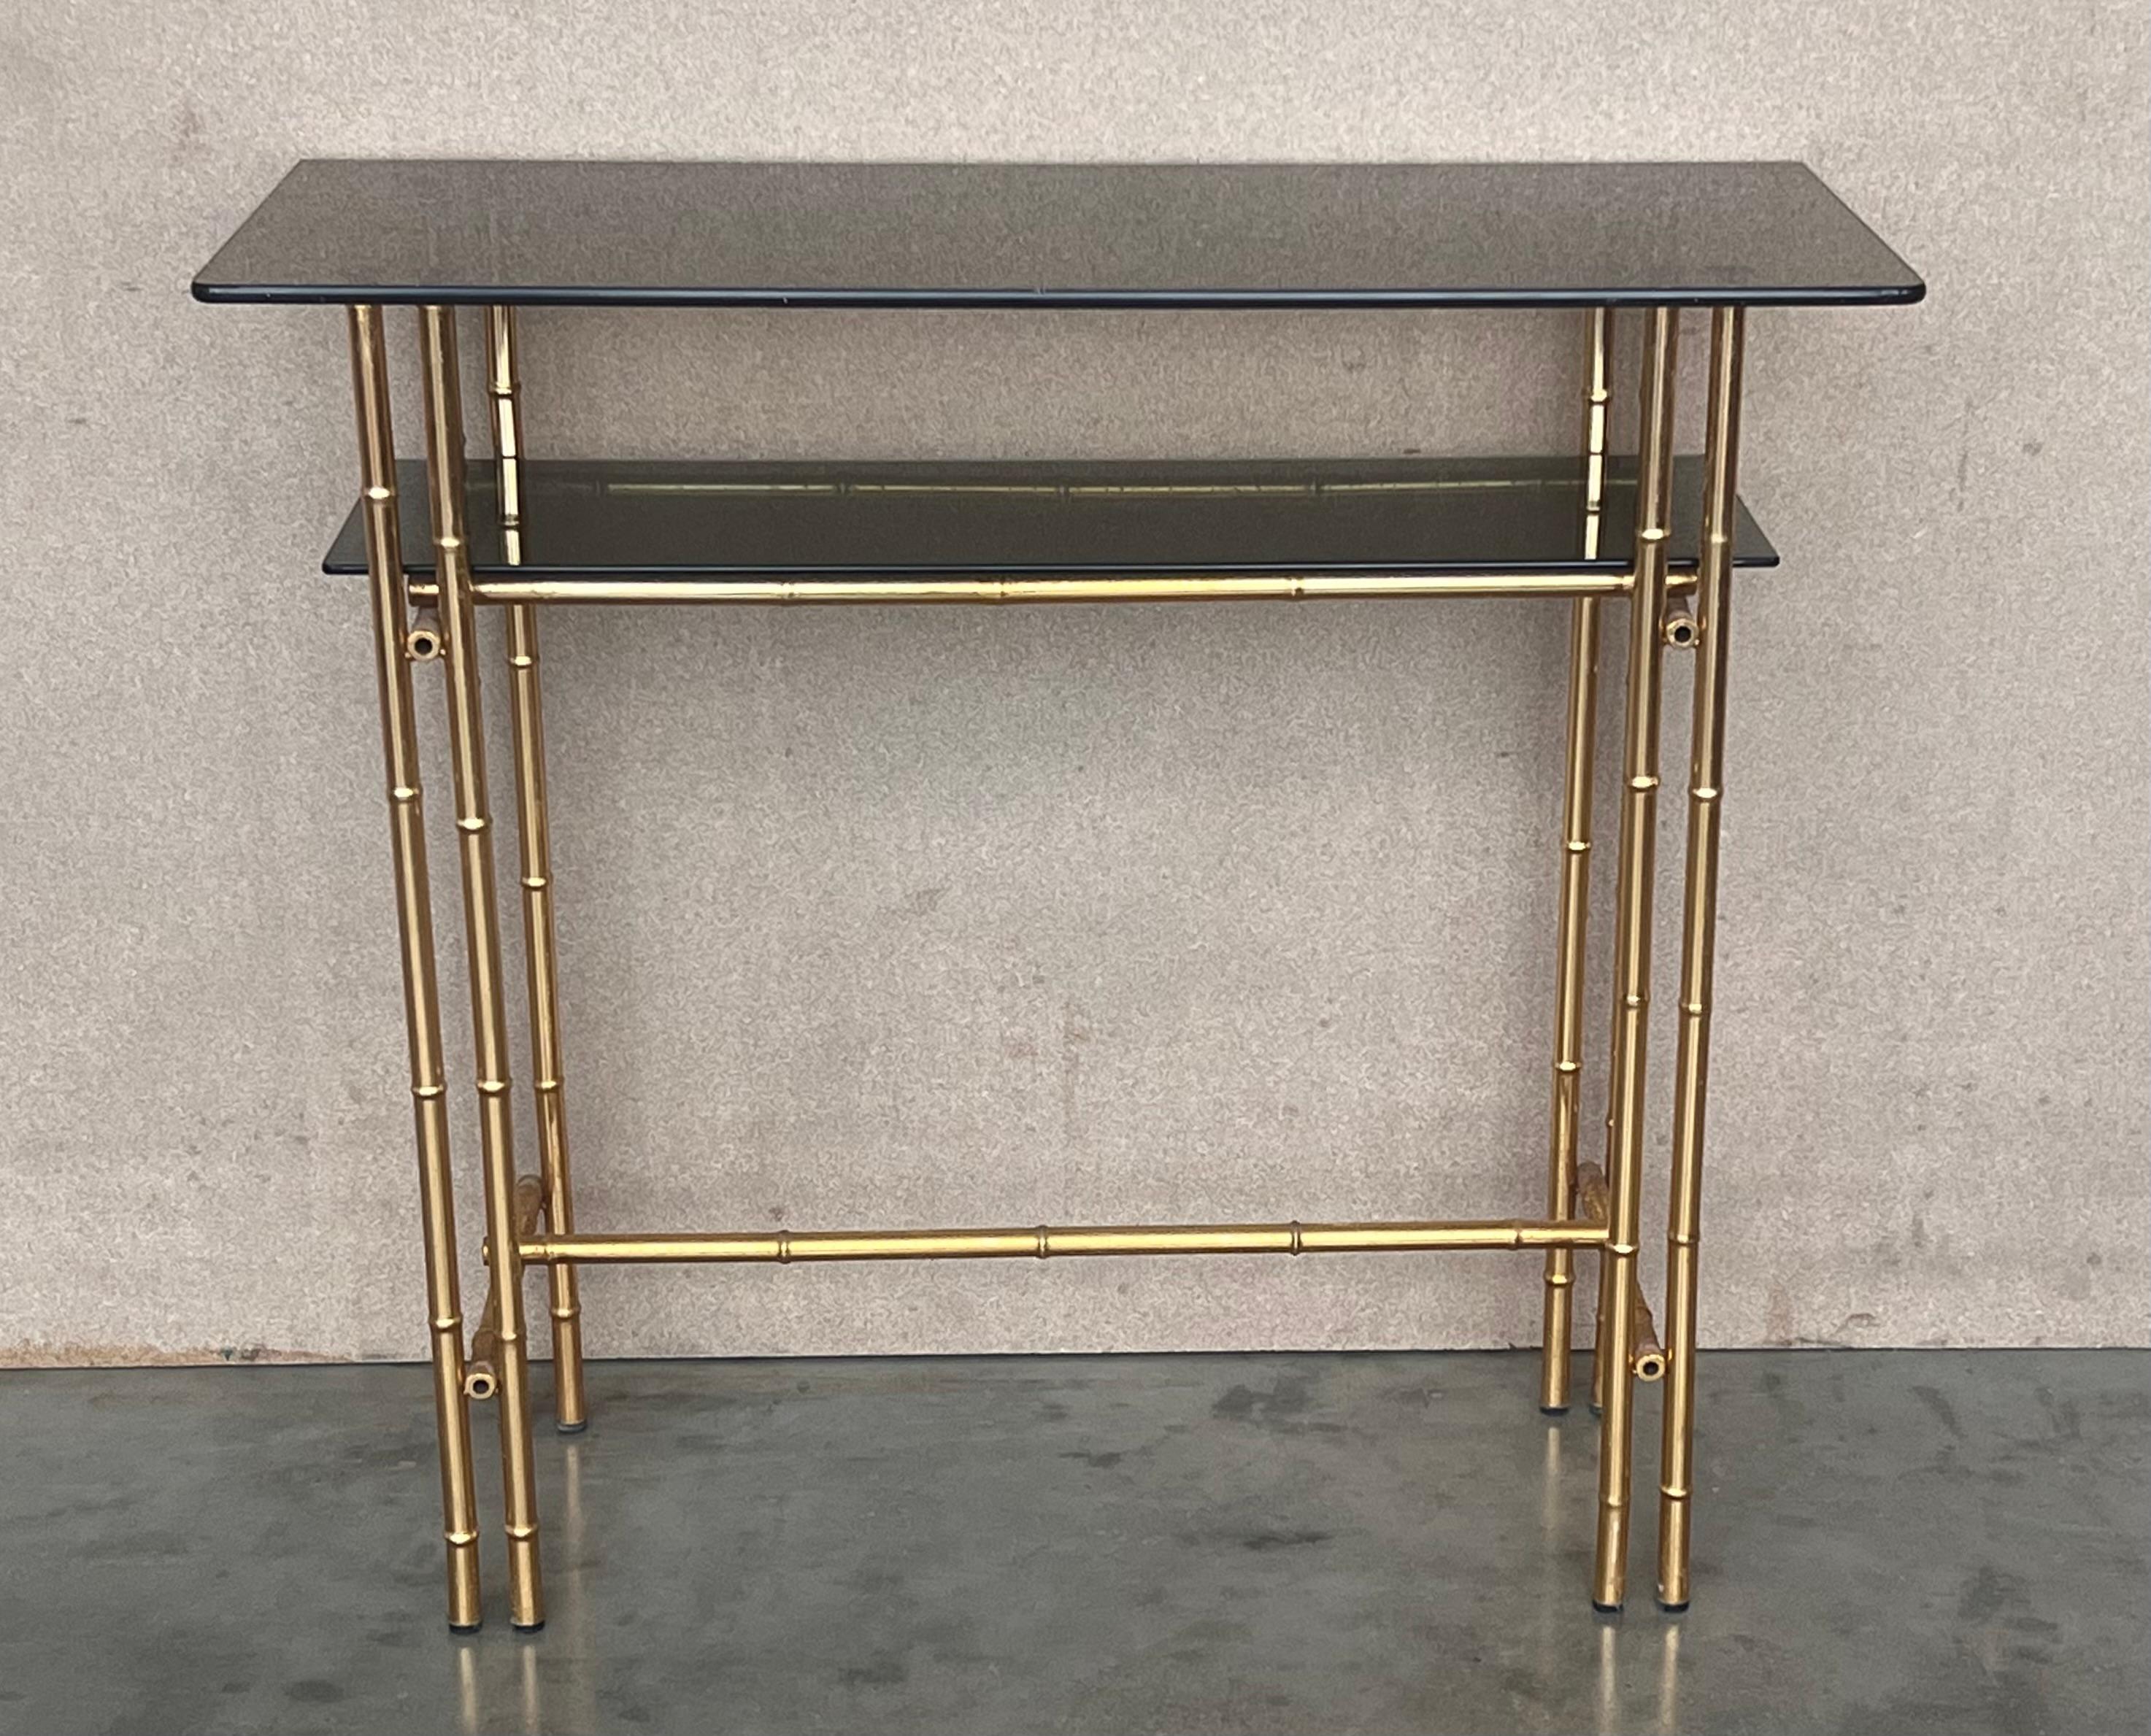 20th Century Mid-Century Modern Italian Faux Bamboo Gilt Metal Console with Smoked Glass For Sale